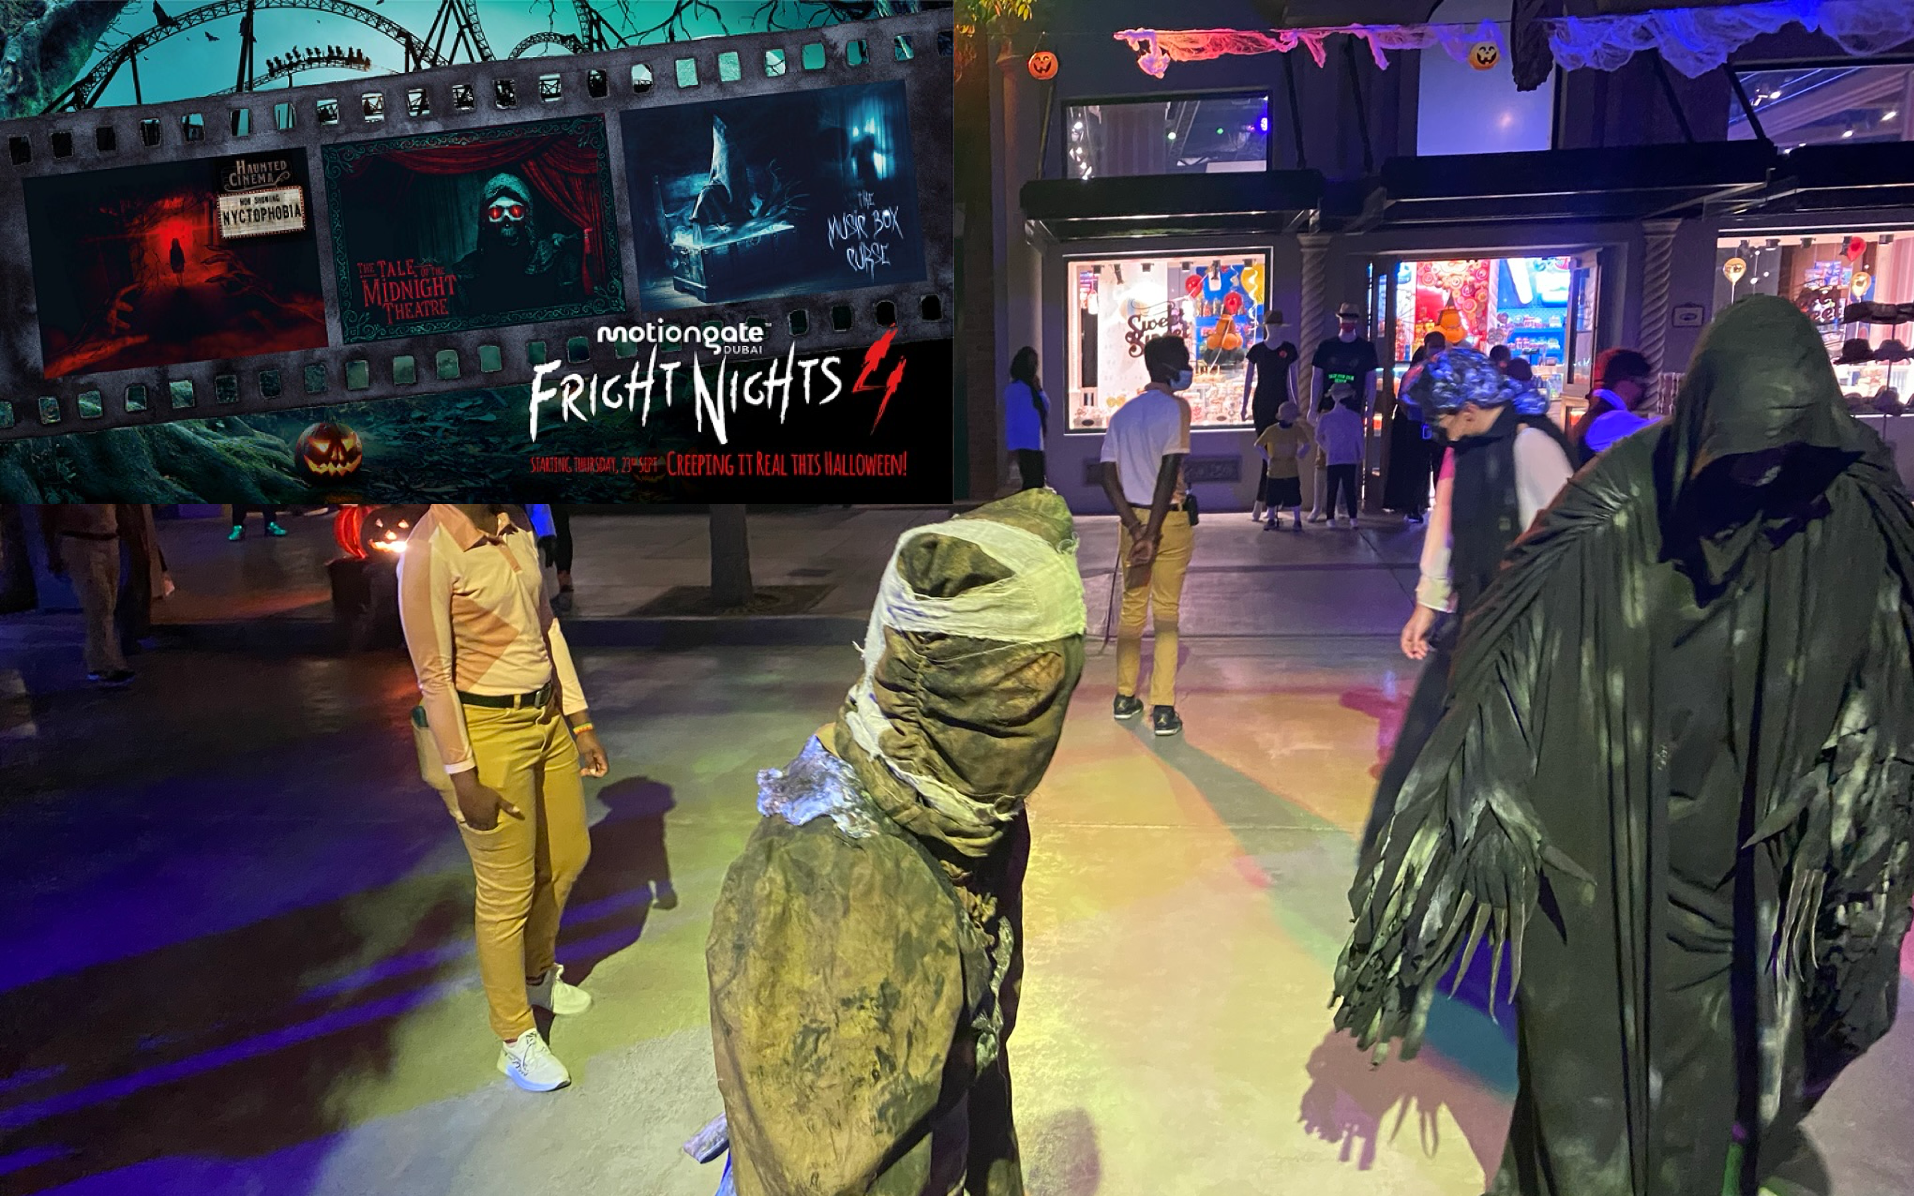 Mummies and zombies walking on the streets for Fright Nights at Motiongate